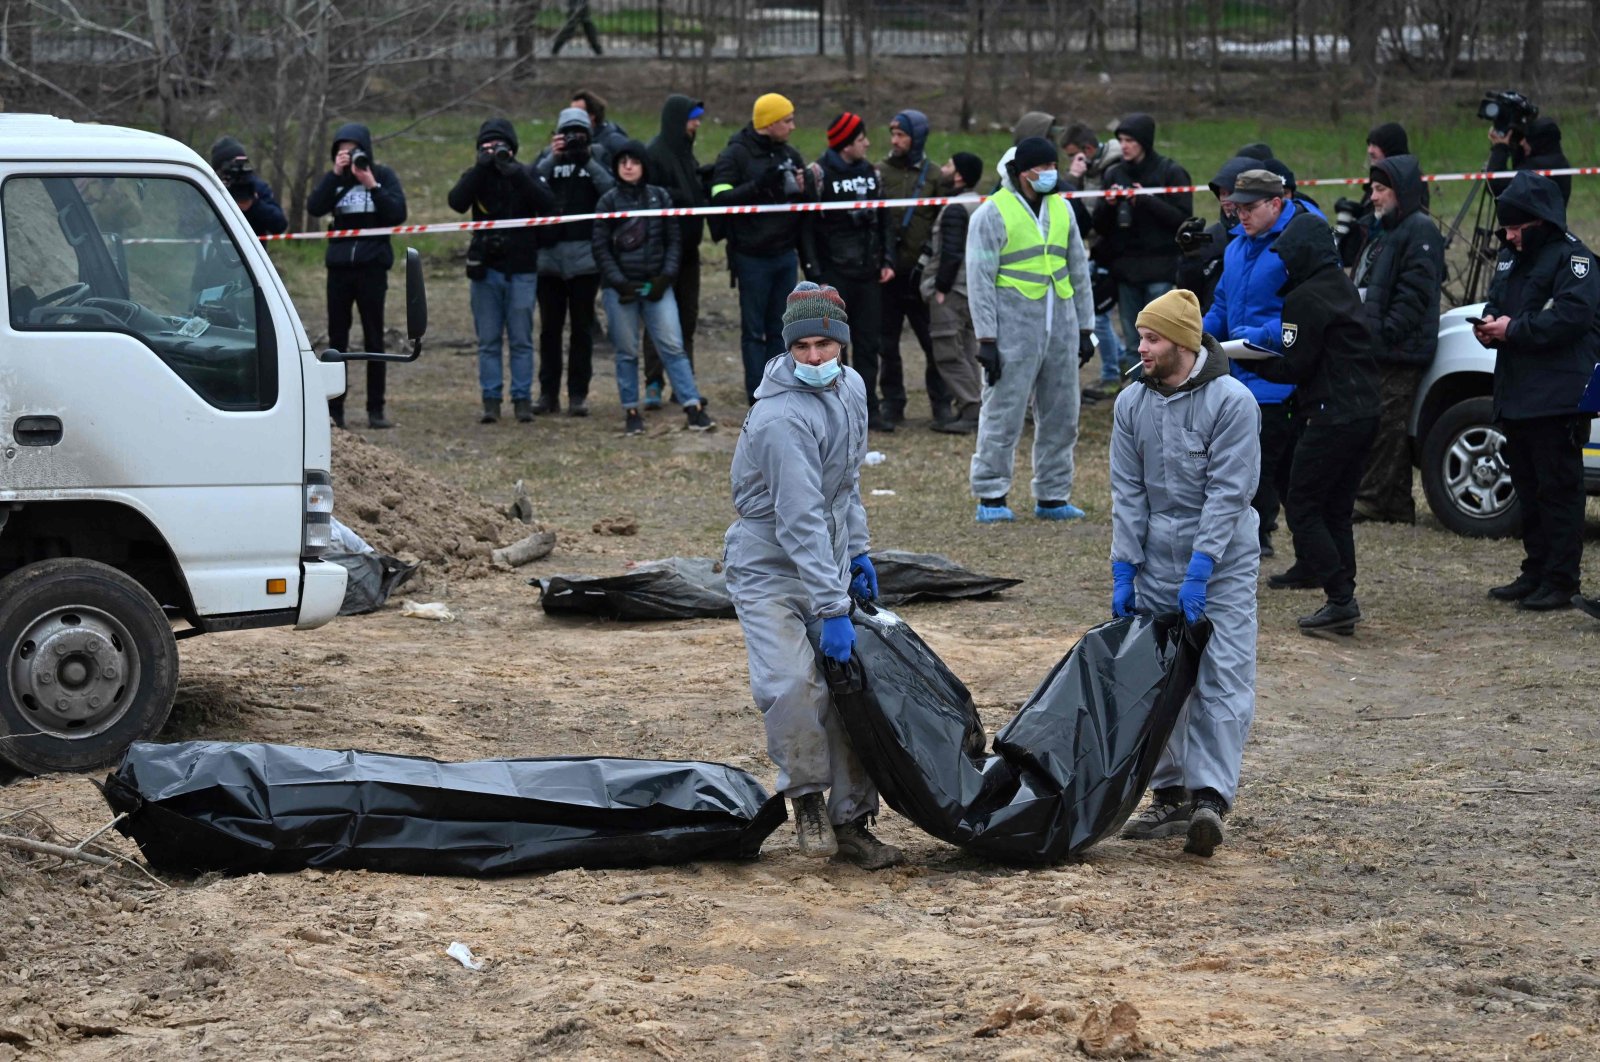 Journalists gather as bodies are exhumed and removed from a mass grave on the grounds of the St. Andrew and Pyervozvannoho All Saints Church in the Ukrainian town of Bucha, northwest of Kyiv, April 13, 2022. (AFP Photo)